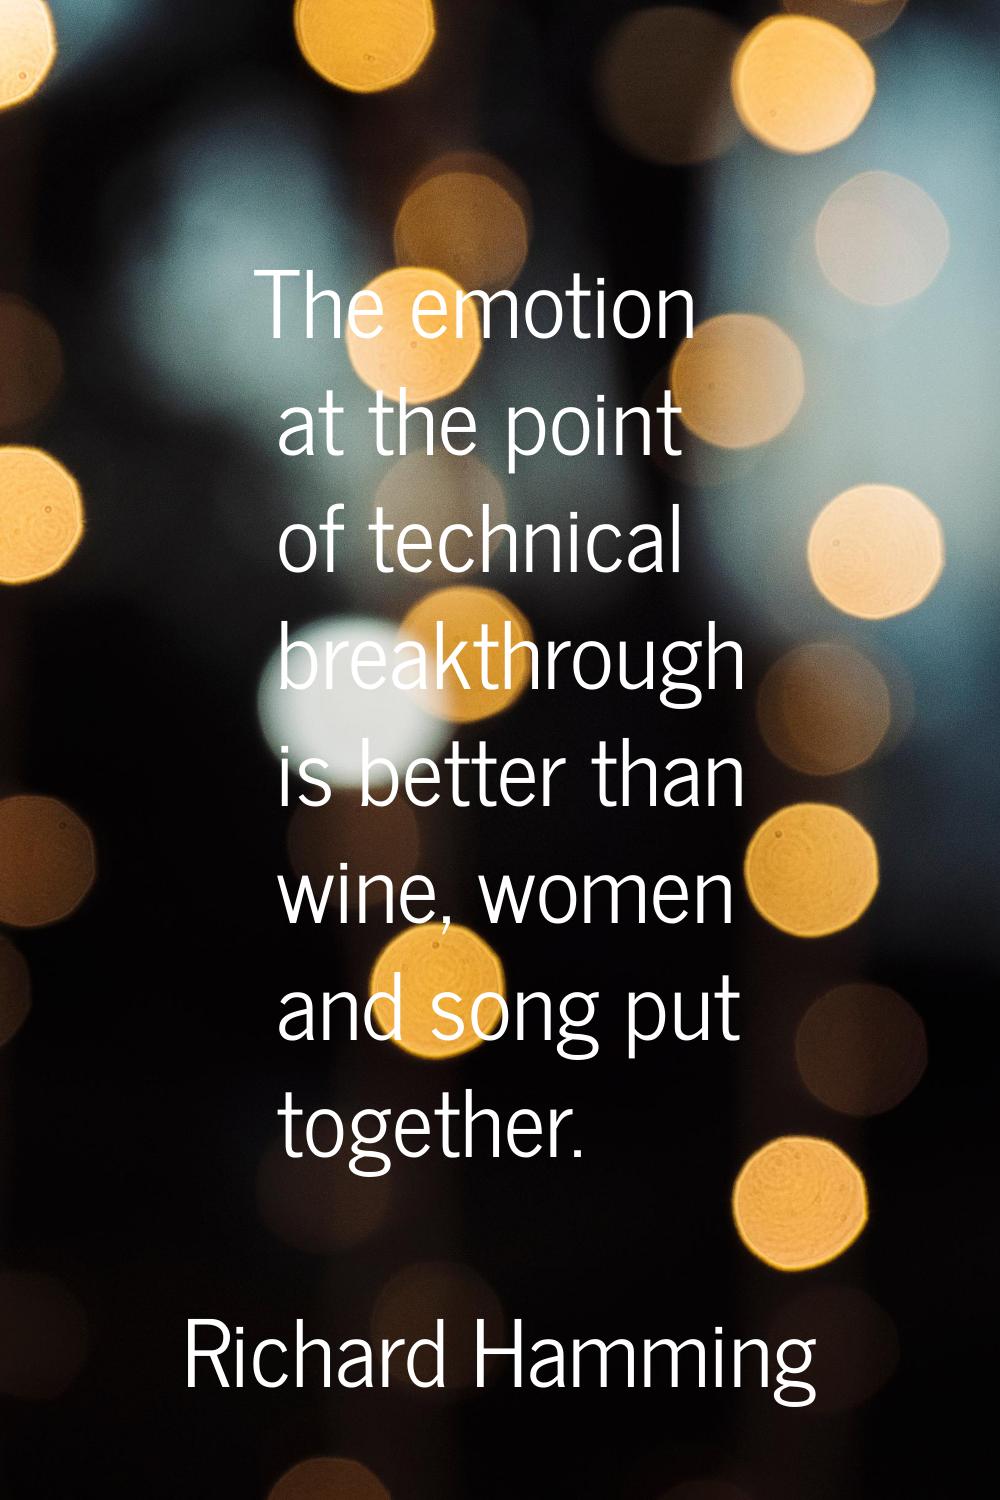 The emotion at the point of technical breakthrough is better than wine, women and song put together